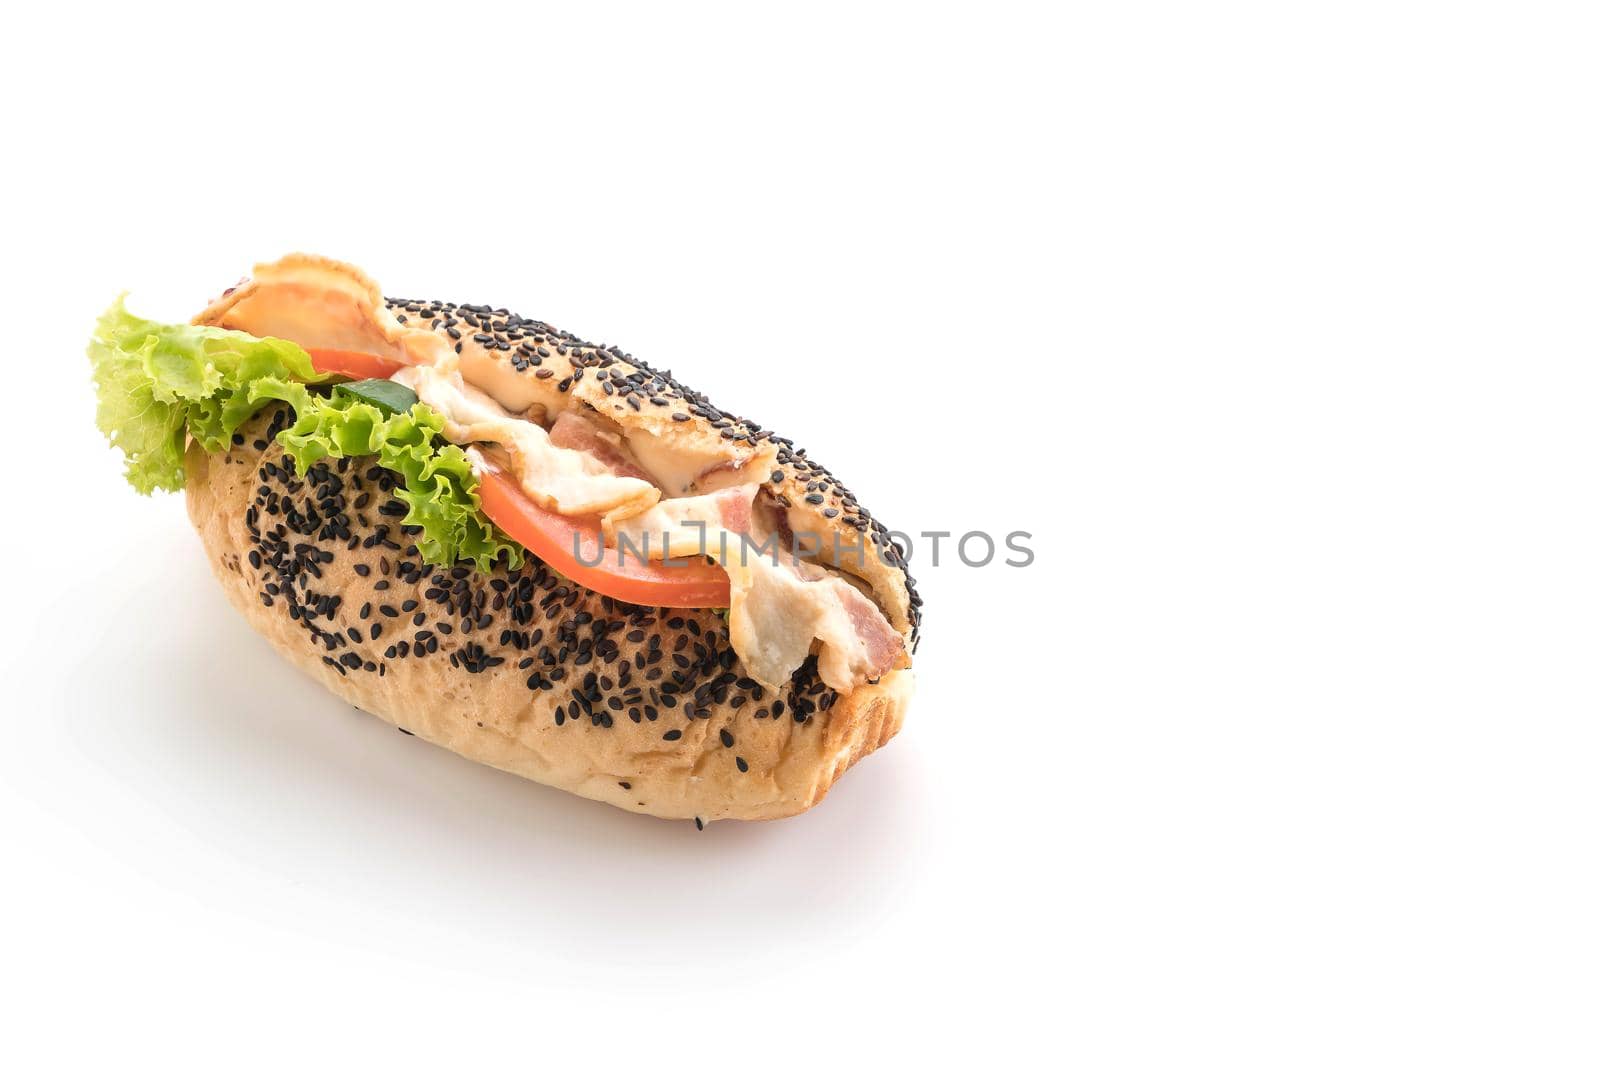 Sandwich with bacon and vegetables on white background